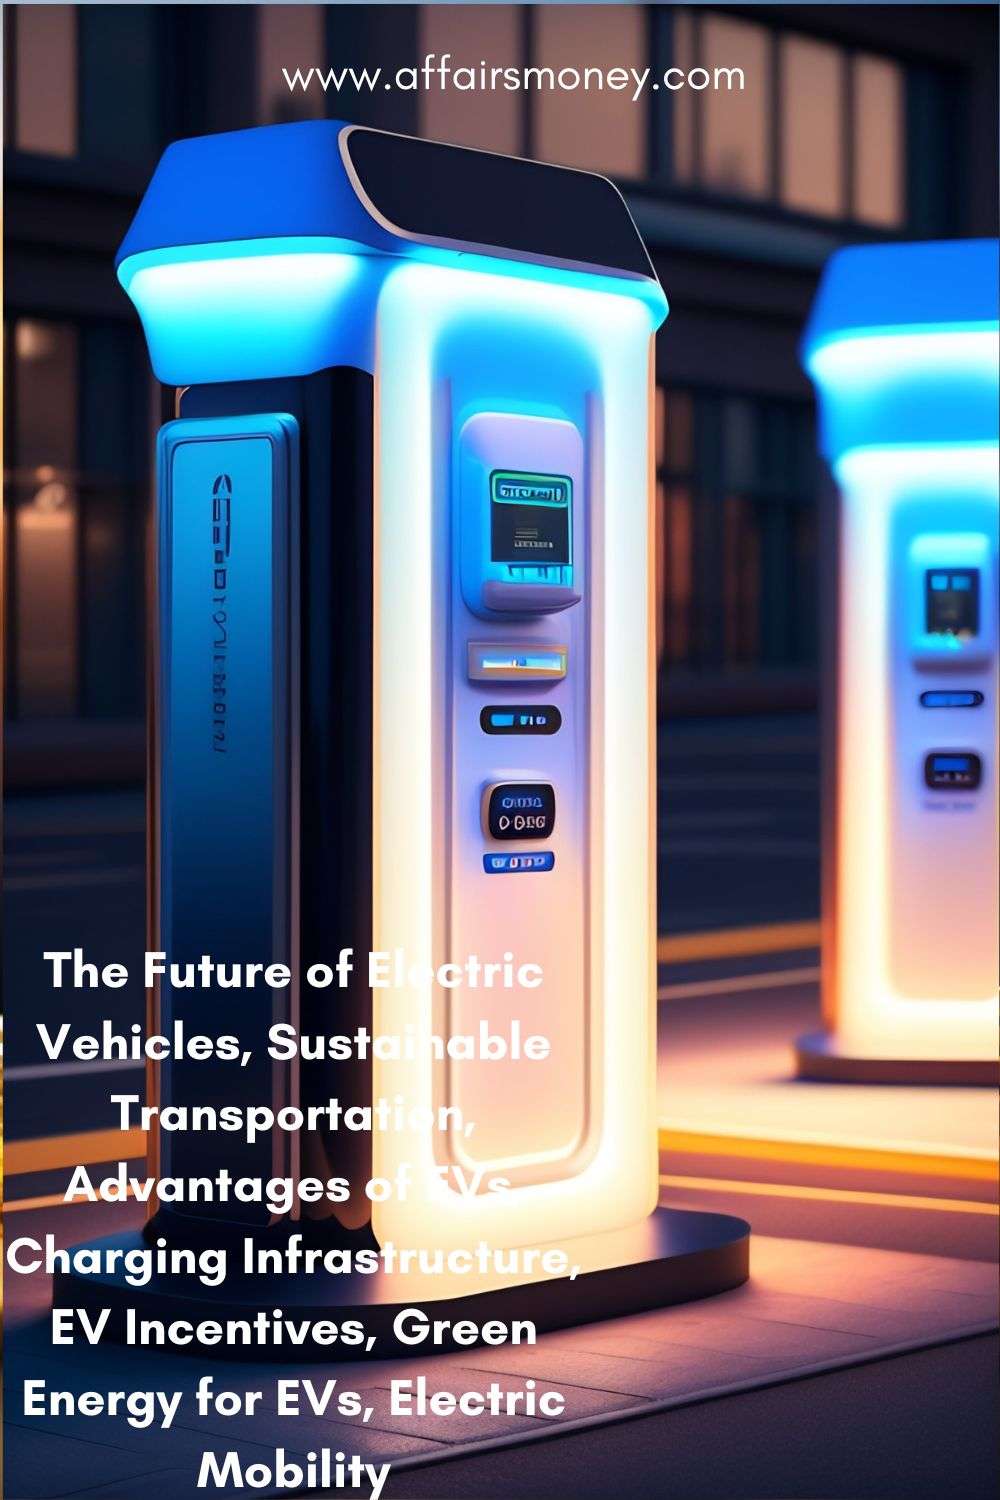 The Future of Electric Vehicles,